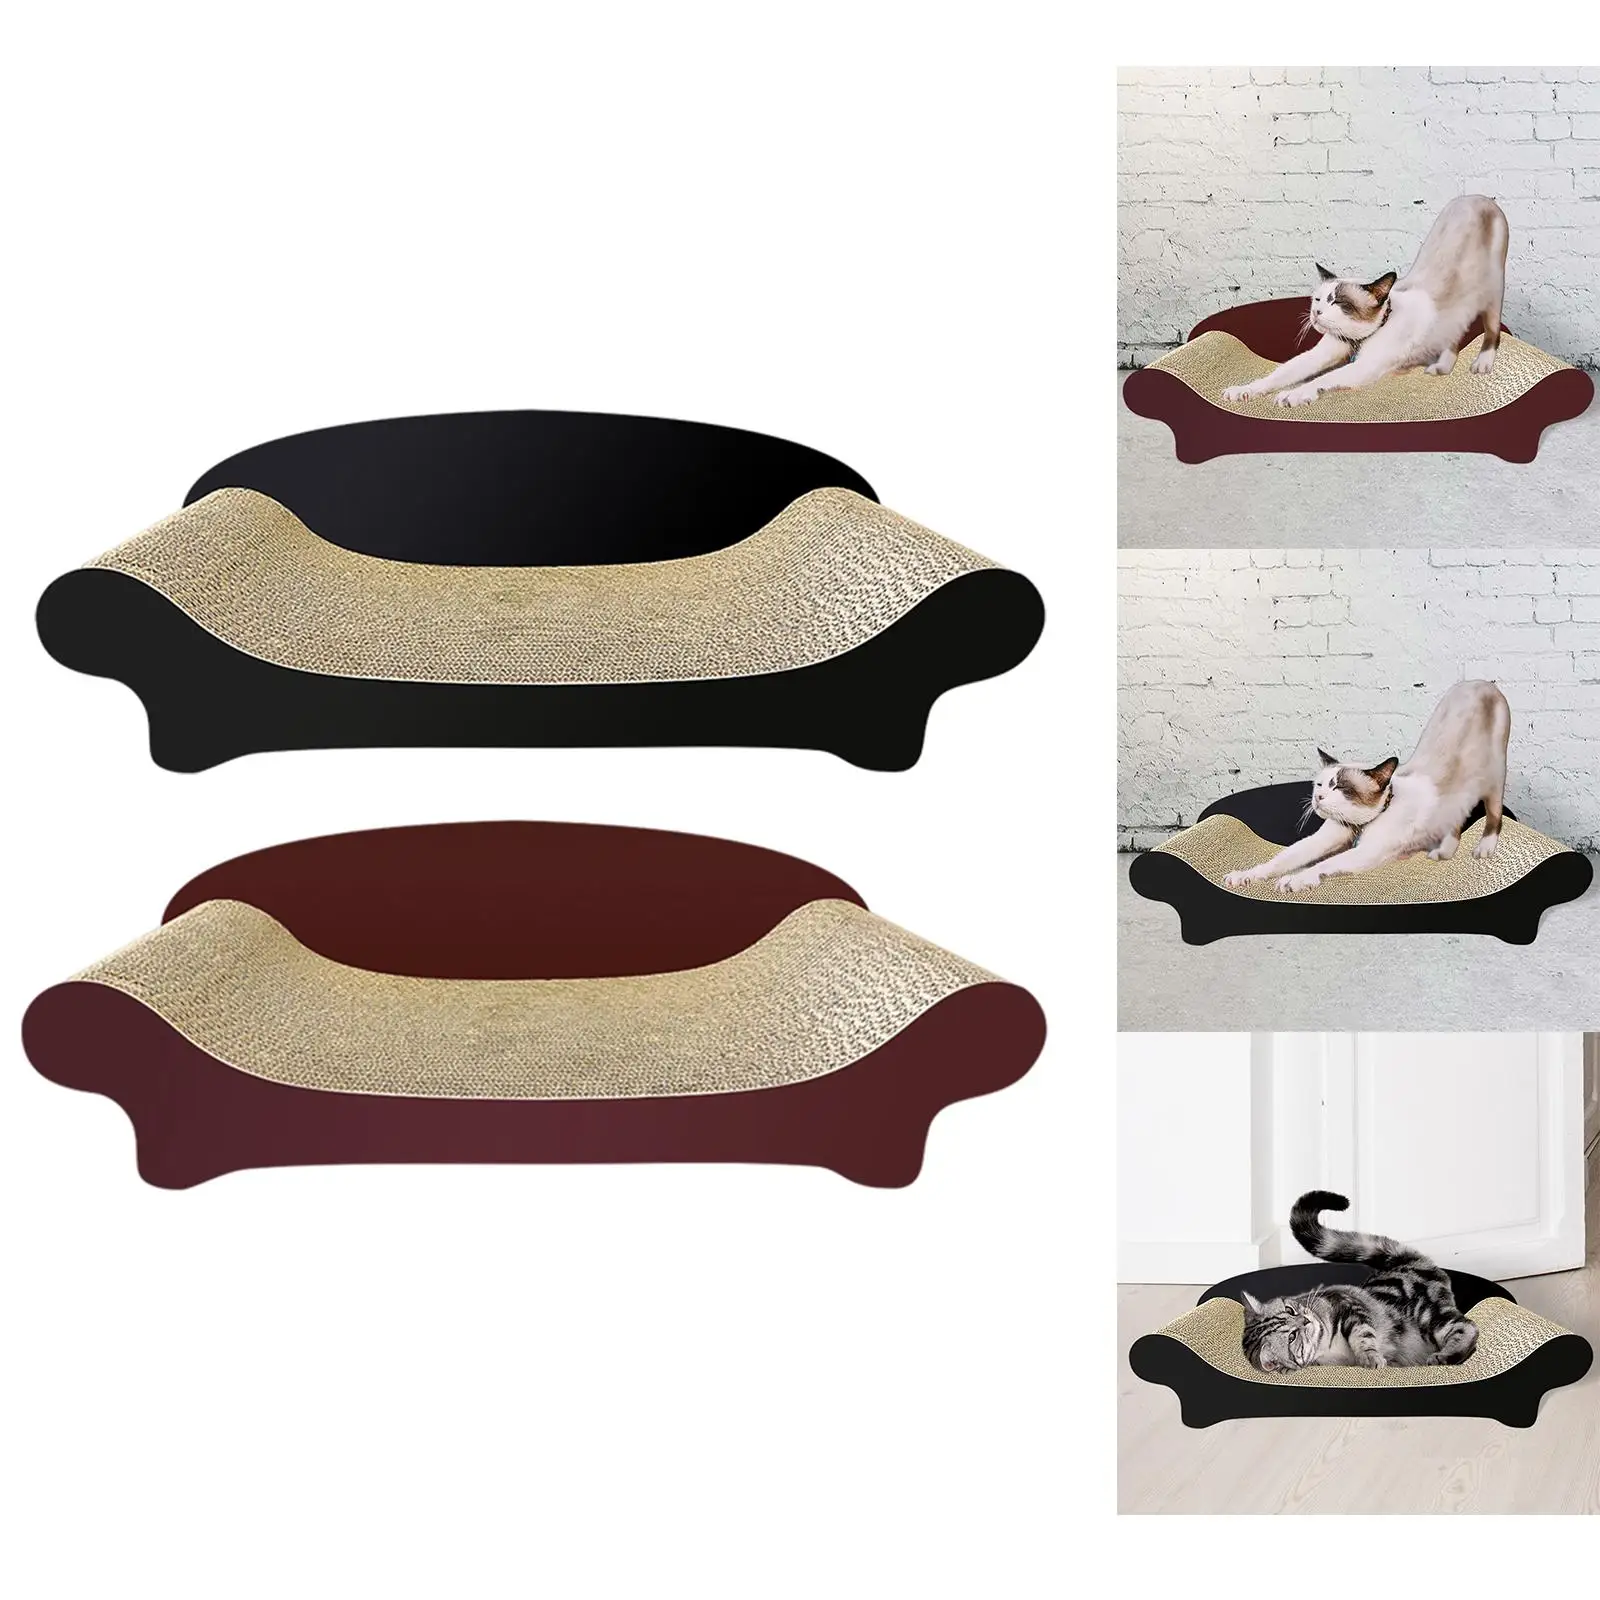 Cat Scratcher Cardboard Lounge Bed, Cat post for scratching, Durable Board Pads Prevents Furniture Damage